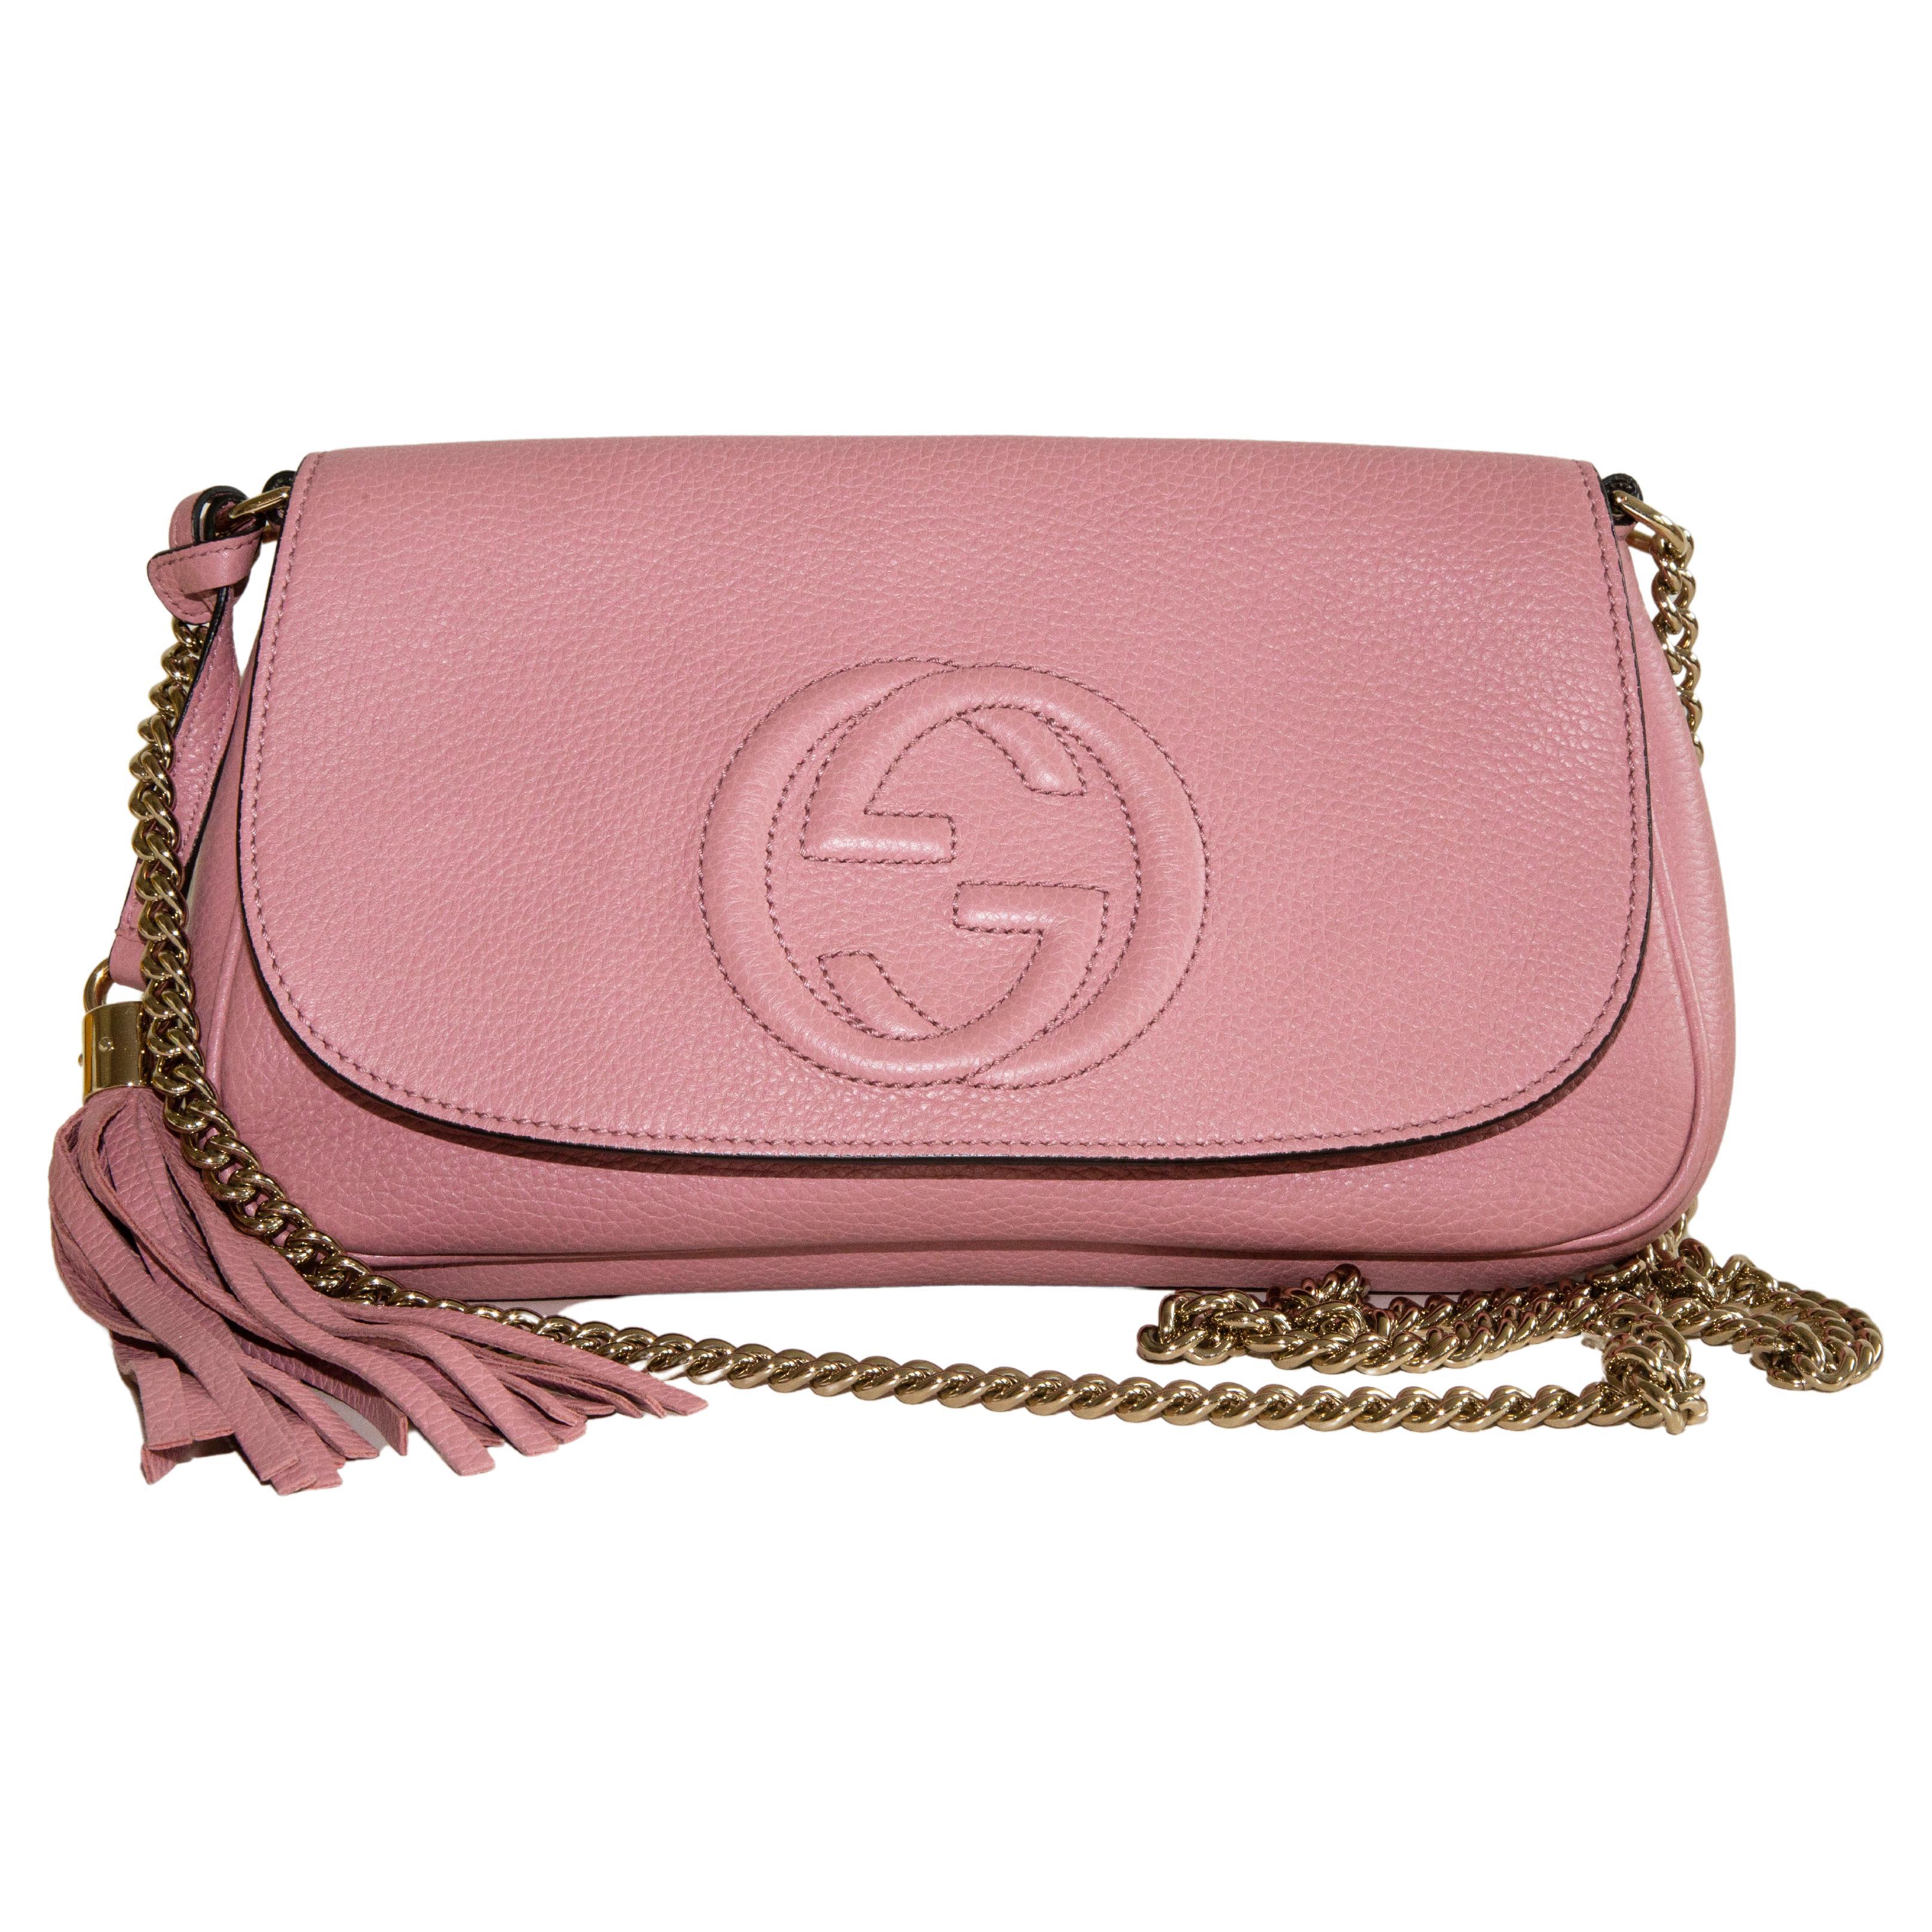 Gucci Soho Pink Leather Crossbody Bag For Sale